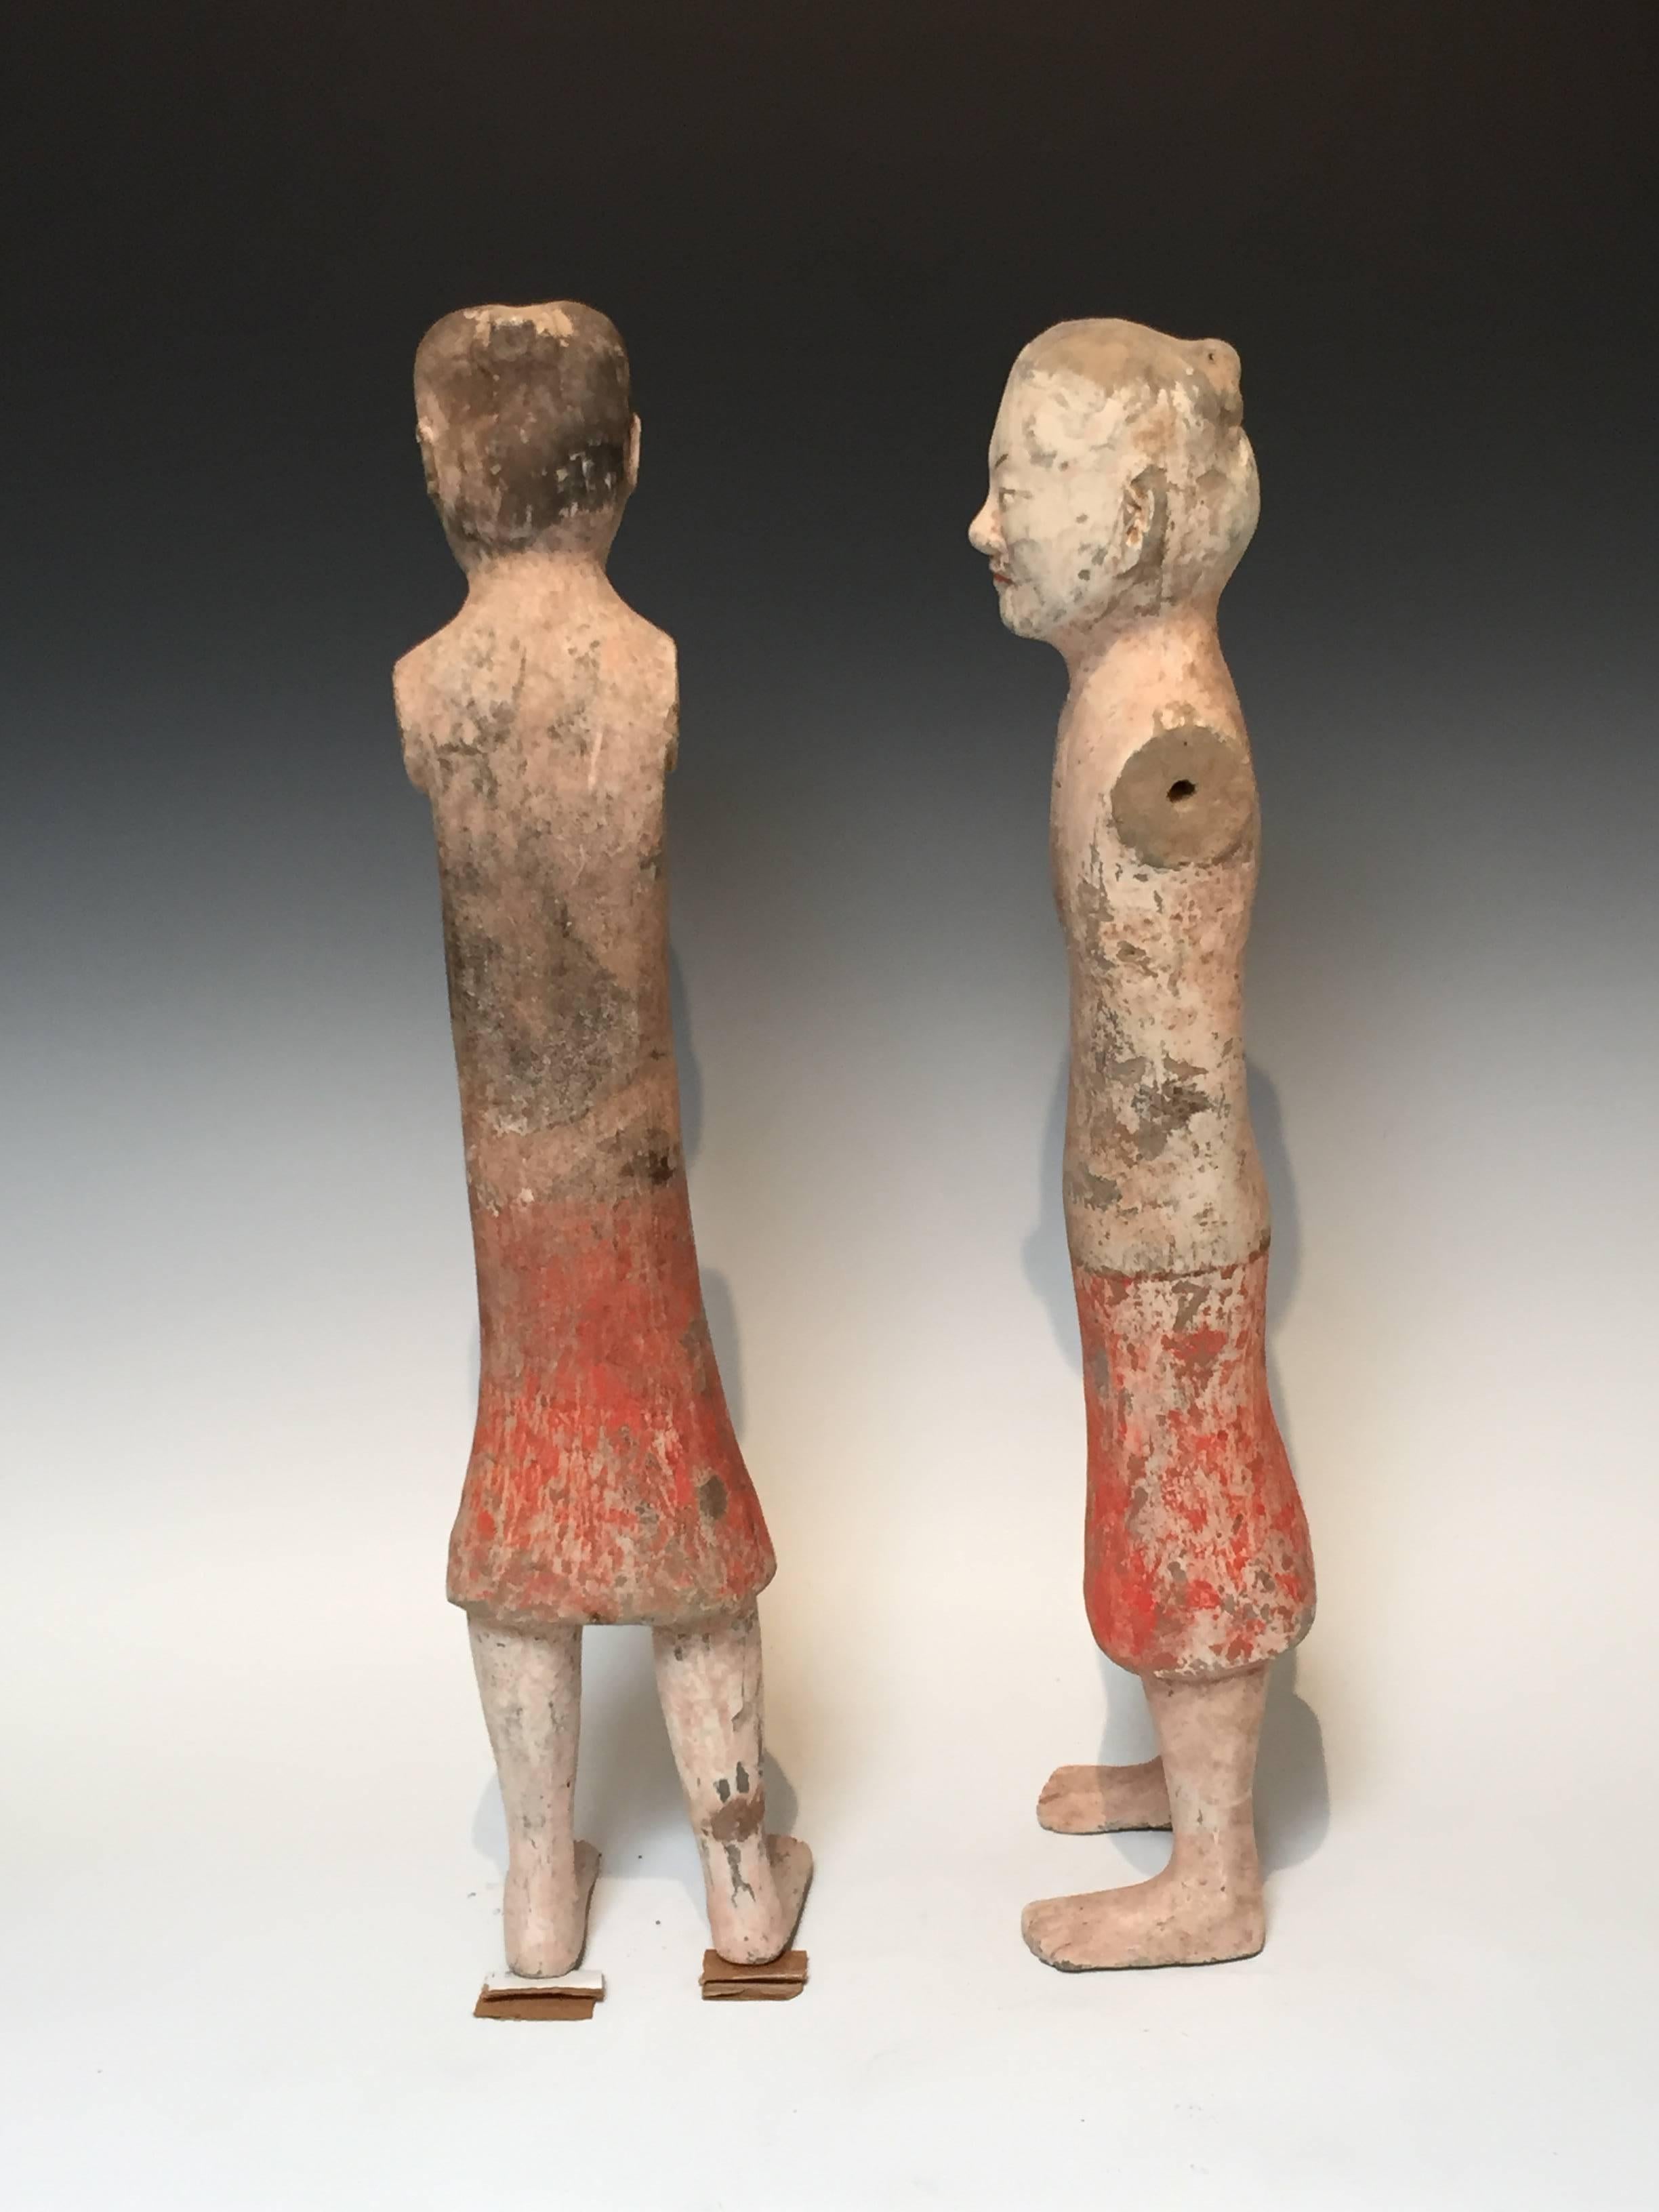 Chinese Ancient Han Dynasty Ceramic Male Figures, 206 BC-220 AD